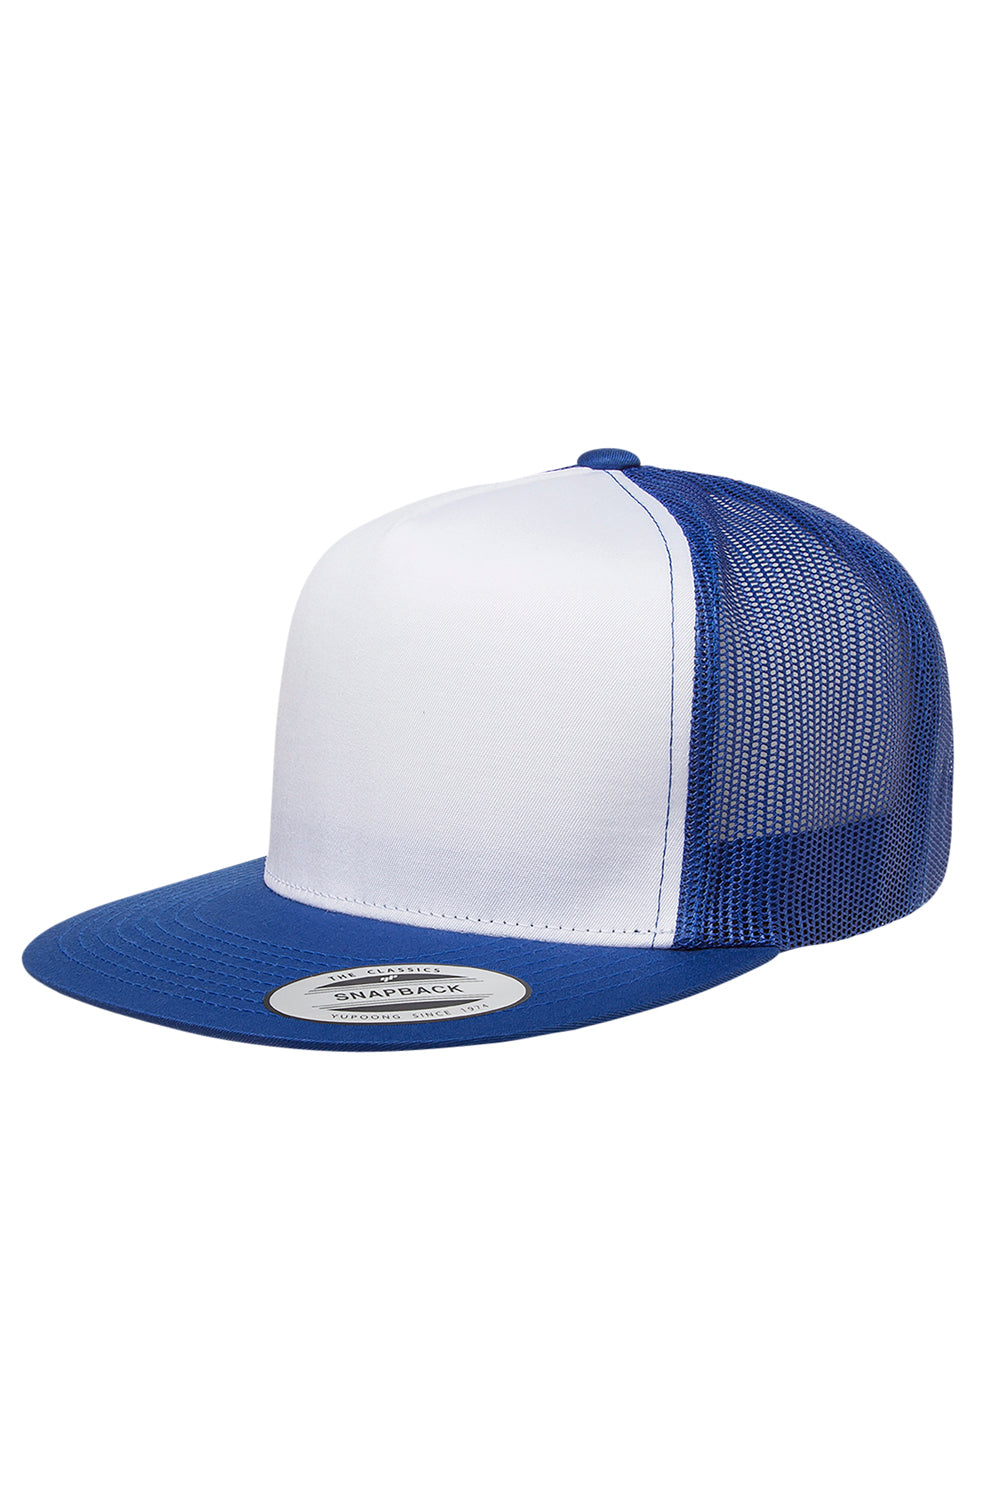 Yupoong 6006W Mens Adjustable Trucker Hat Royal Blue/White Front